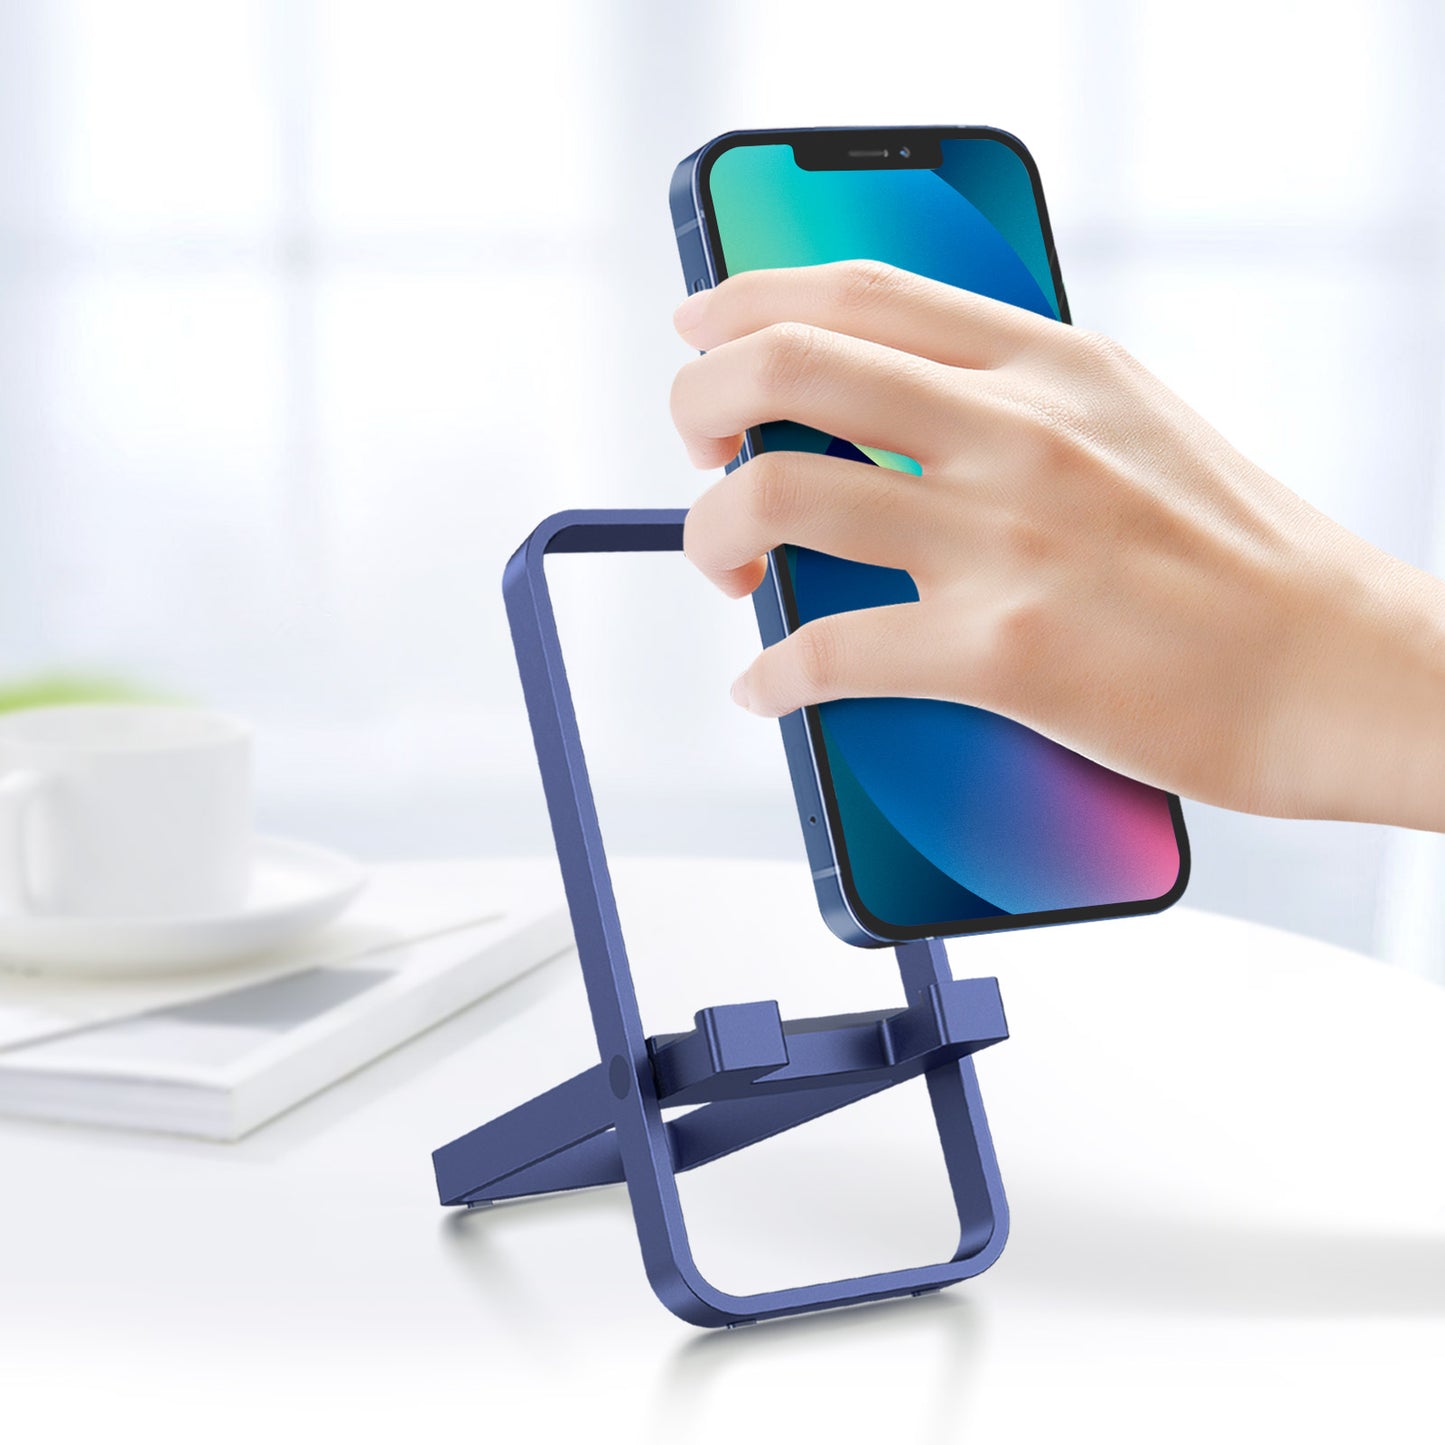 【Phone Stand】スマートフォン 携帯端末 タブレット iPhone android スタンド 軽量 アルミ合金 角度調整 D0043